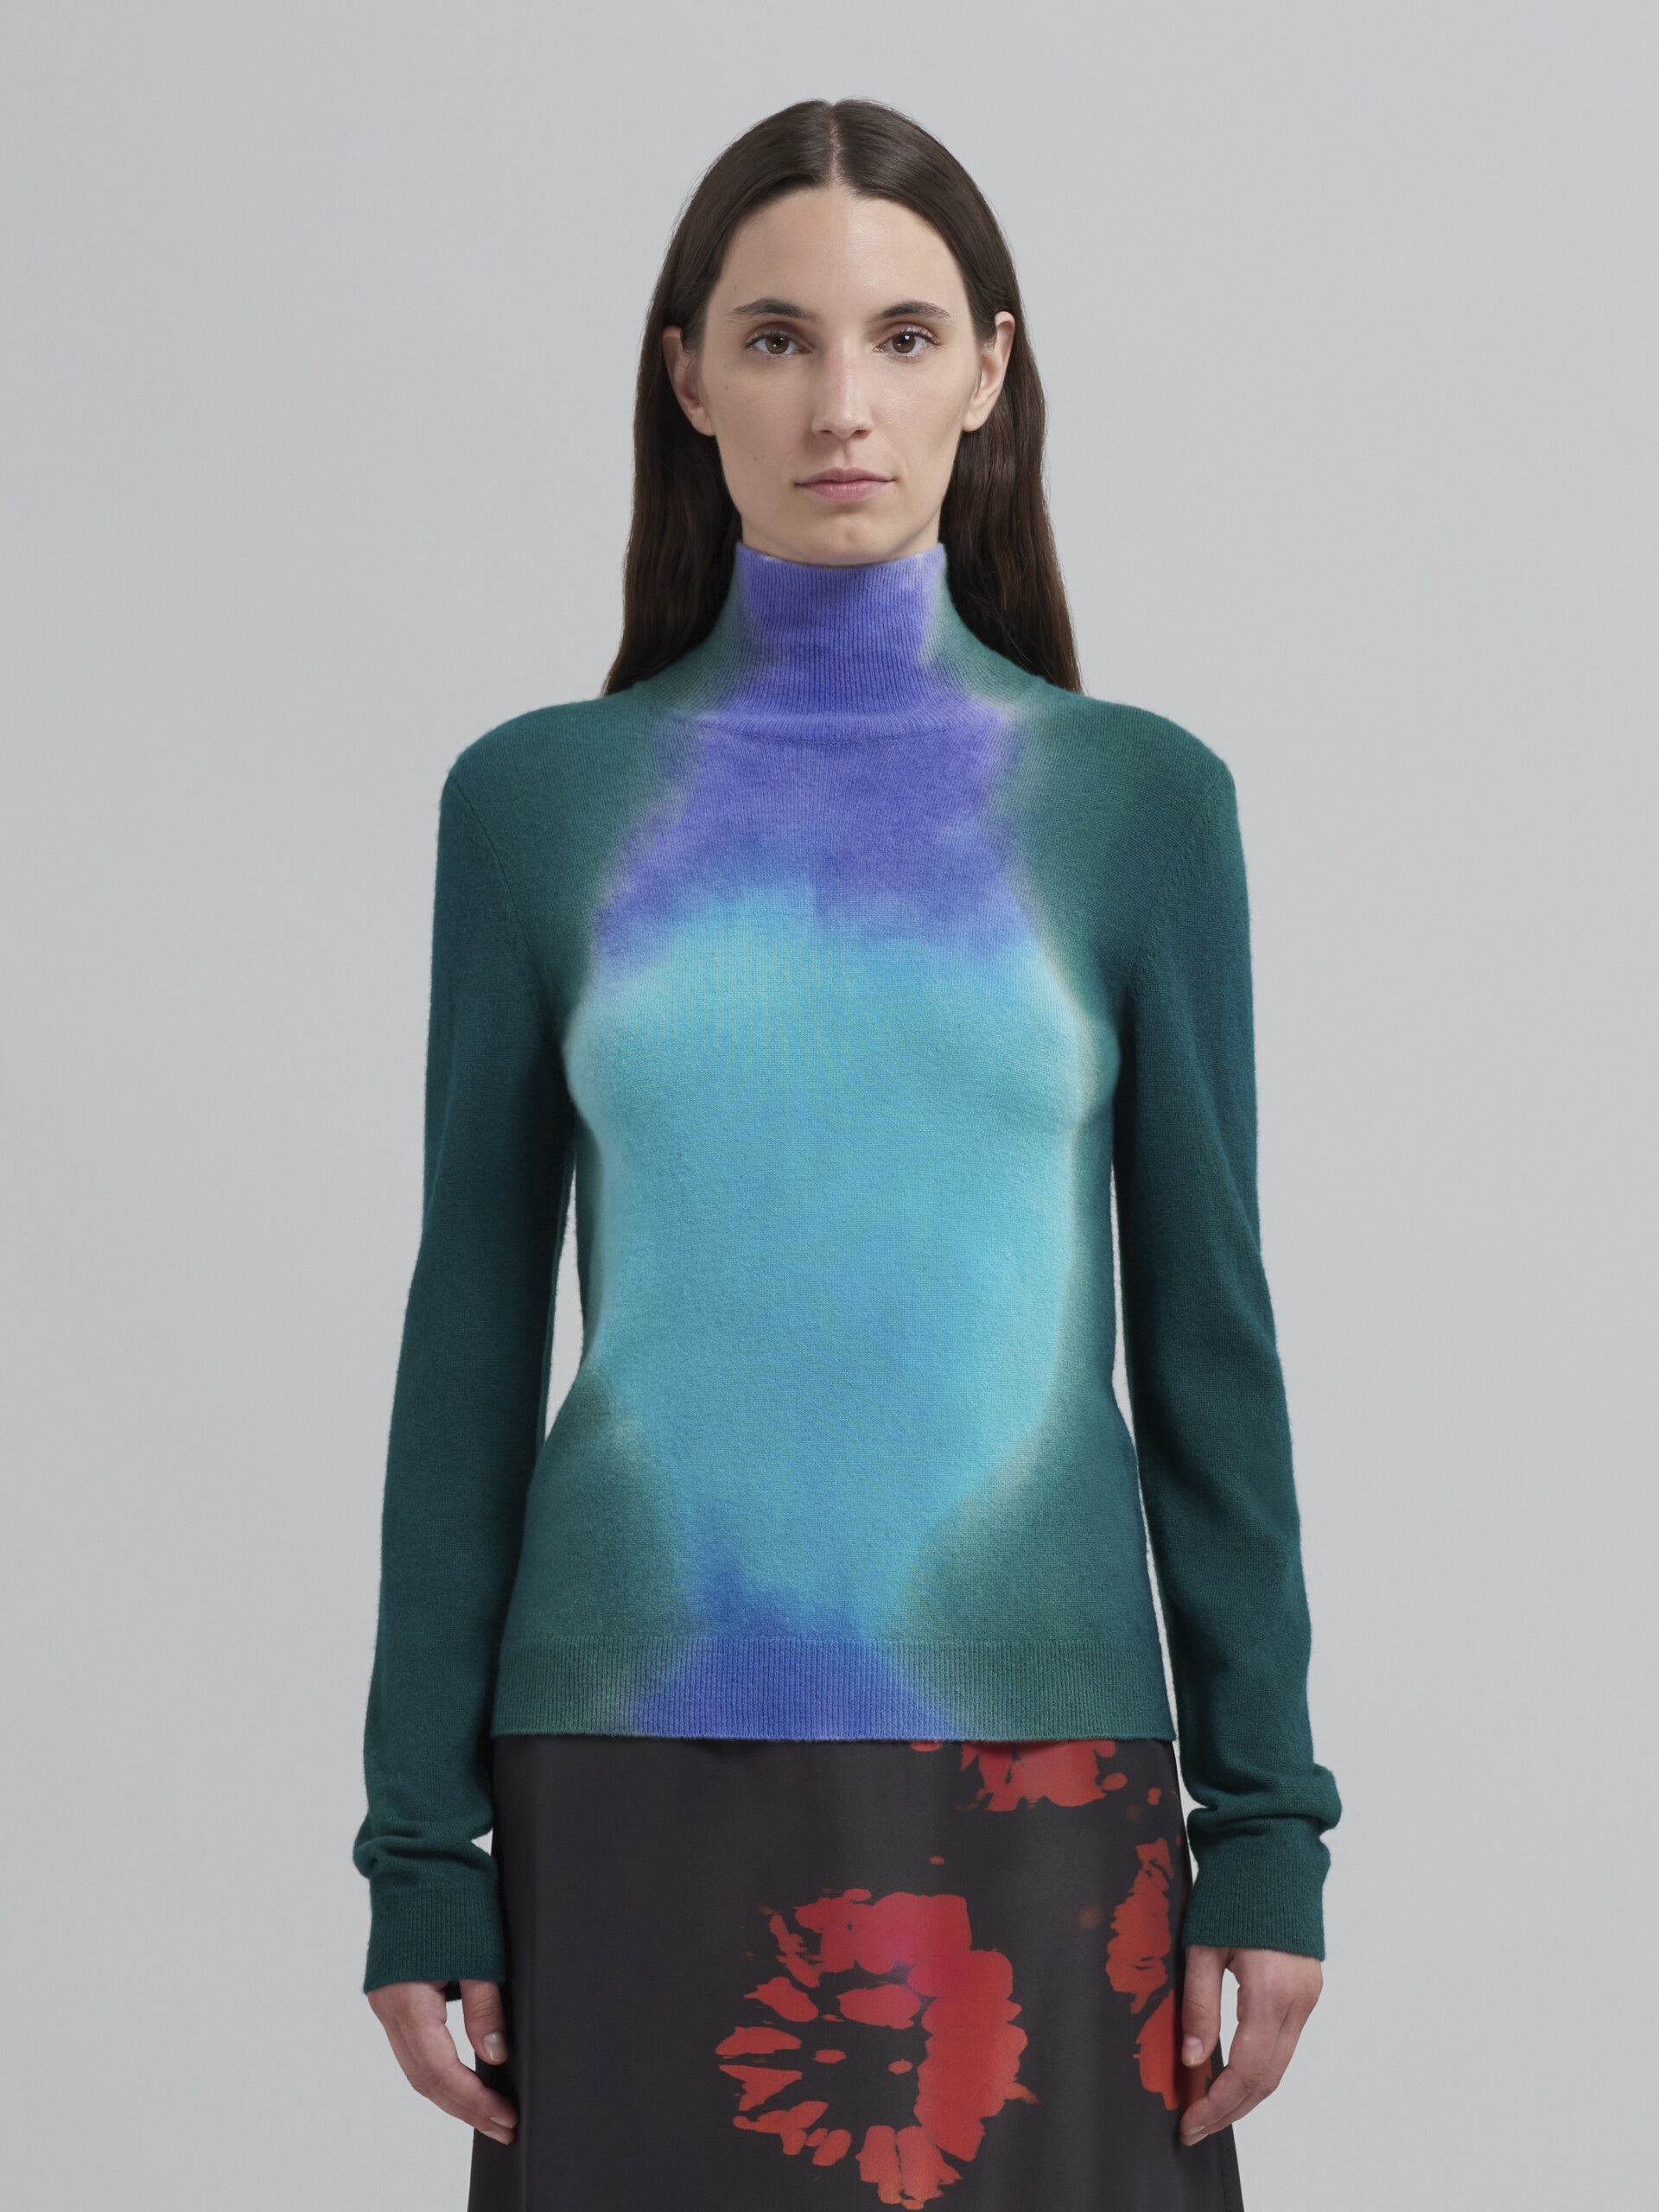 Hand-dyed virgin wool sweater - Pullovers - Image 2